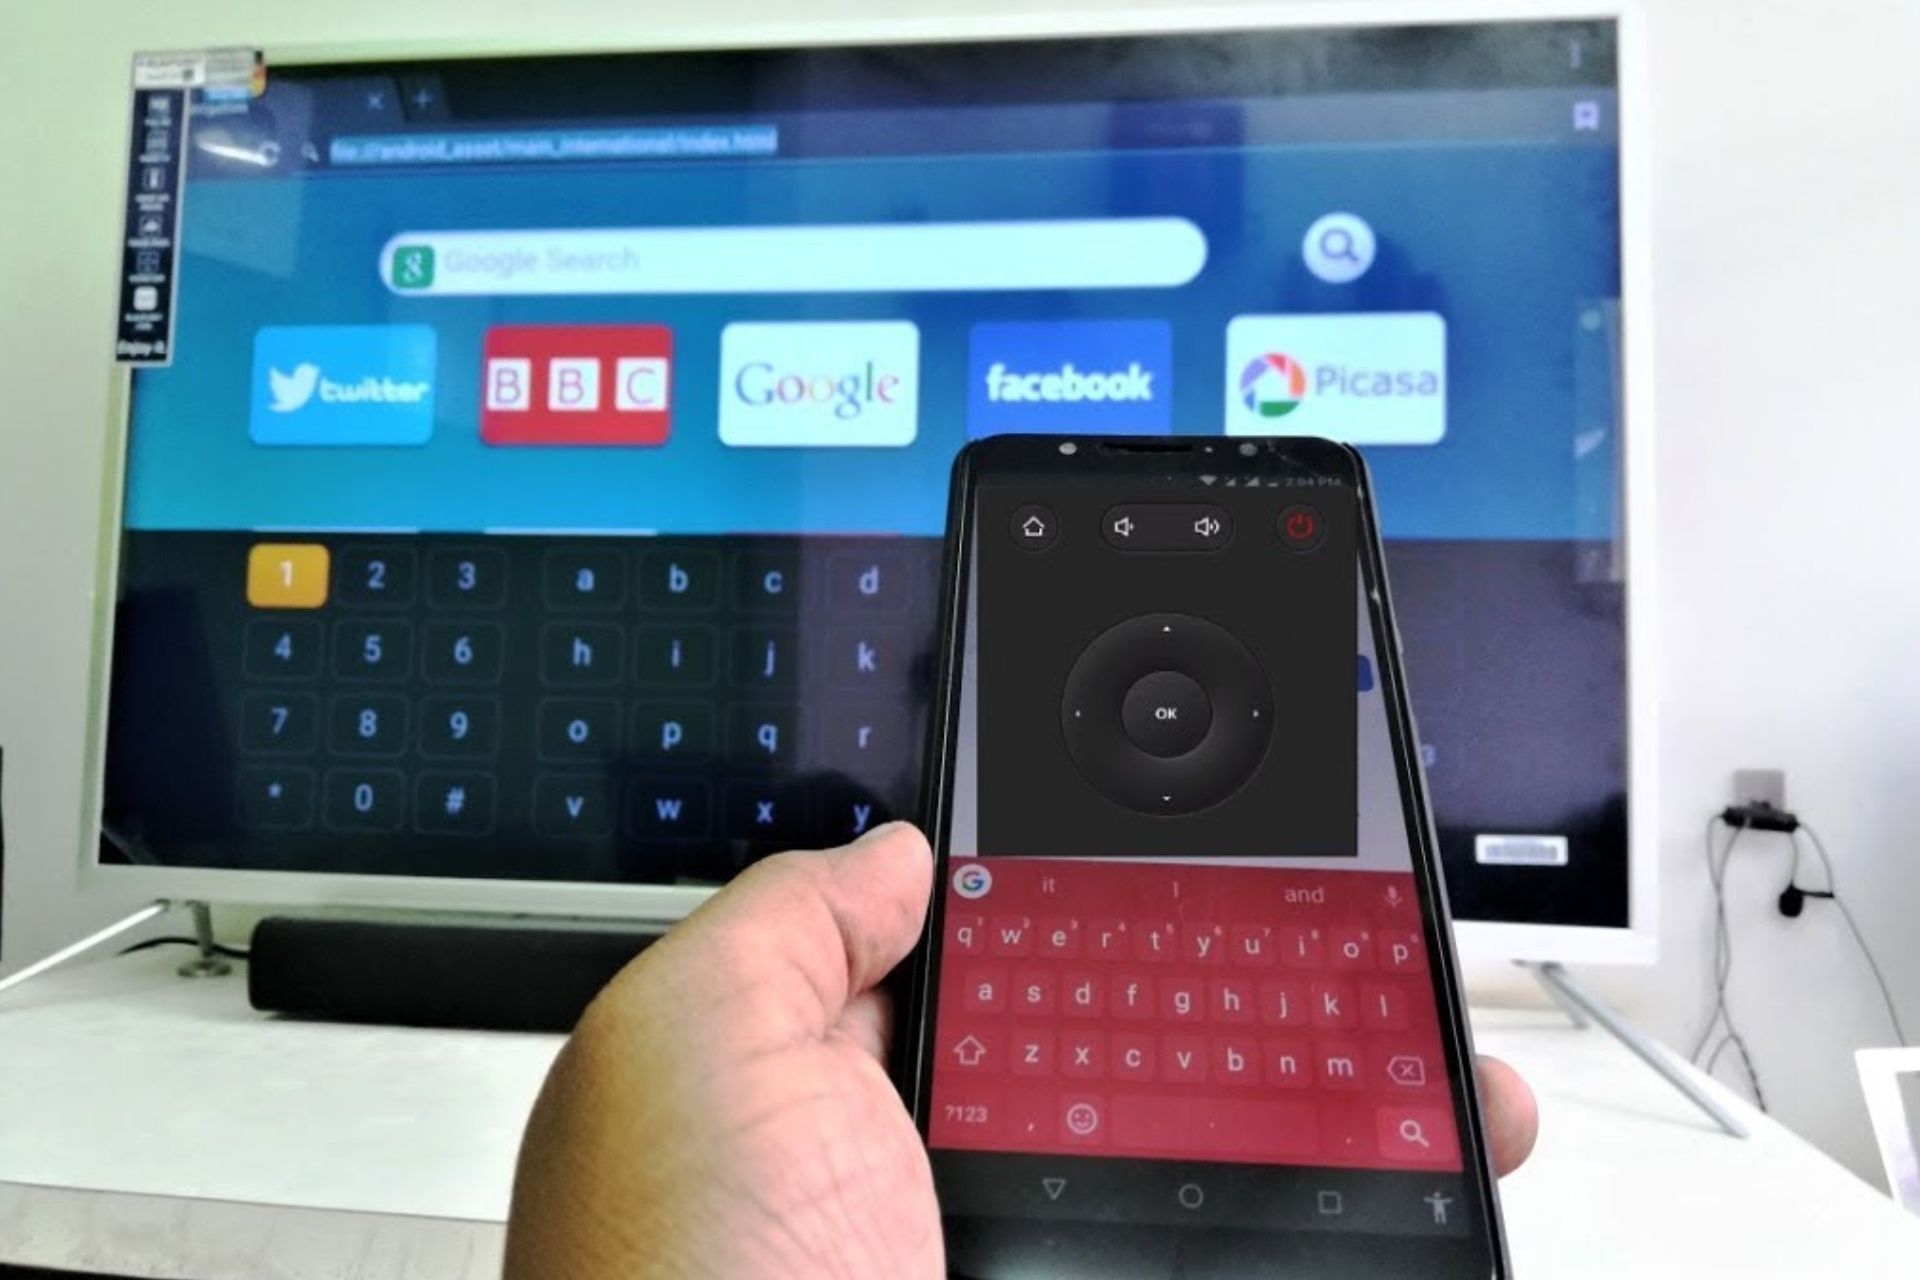 hwo to se phone as keyboard for tv